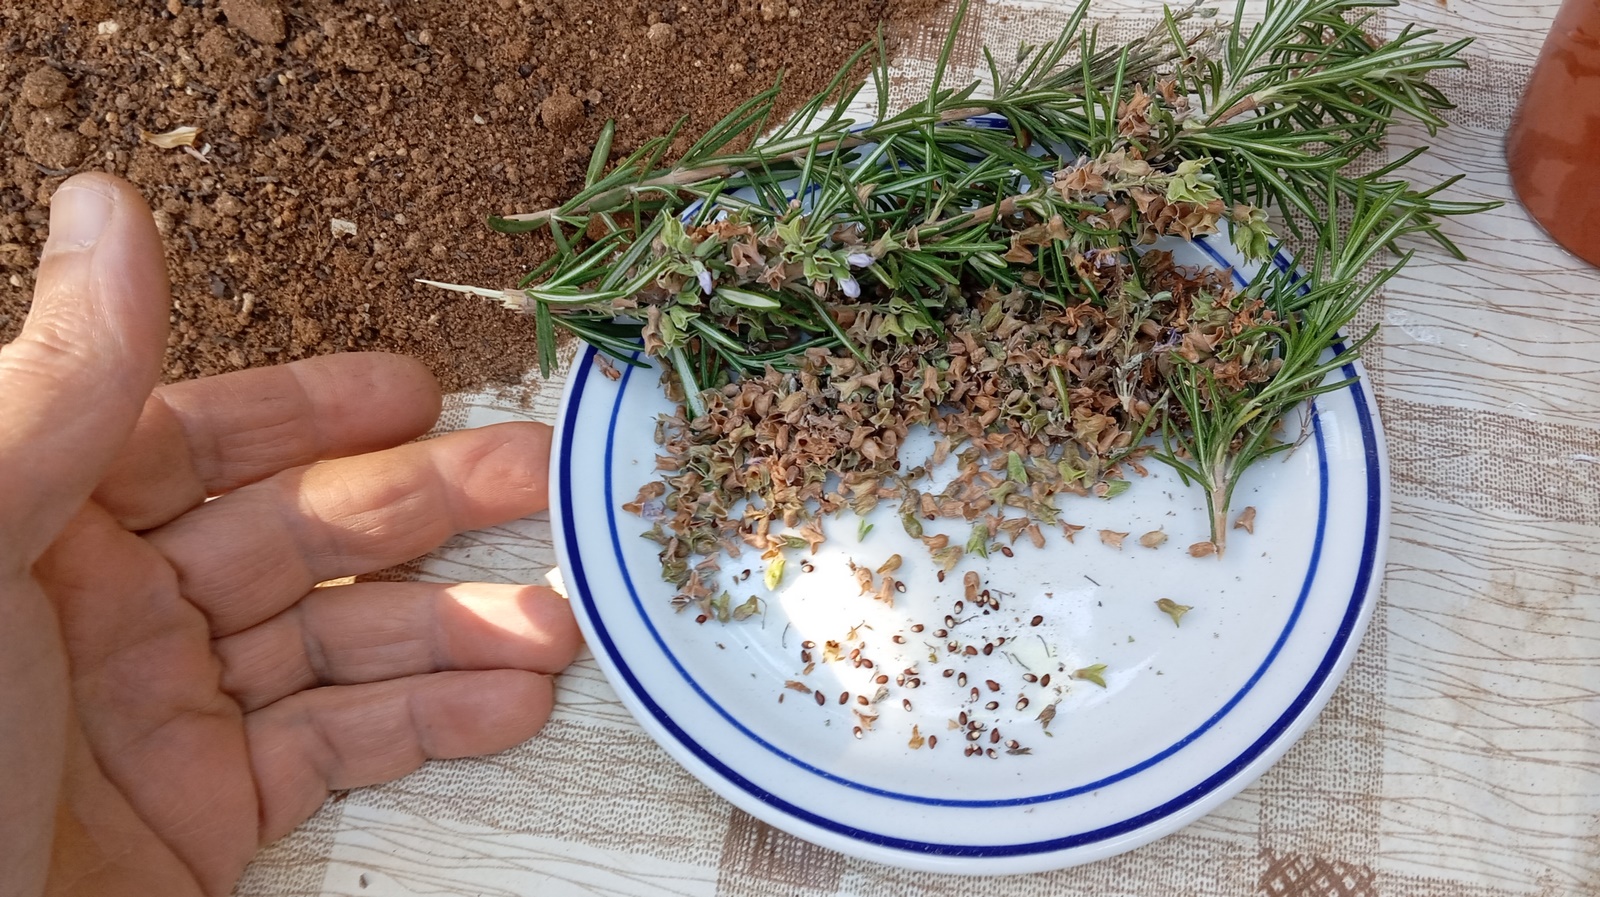 Rosemary seeds are small, elongated, and typically dark brown to black in color.